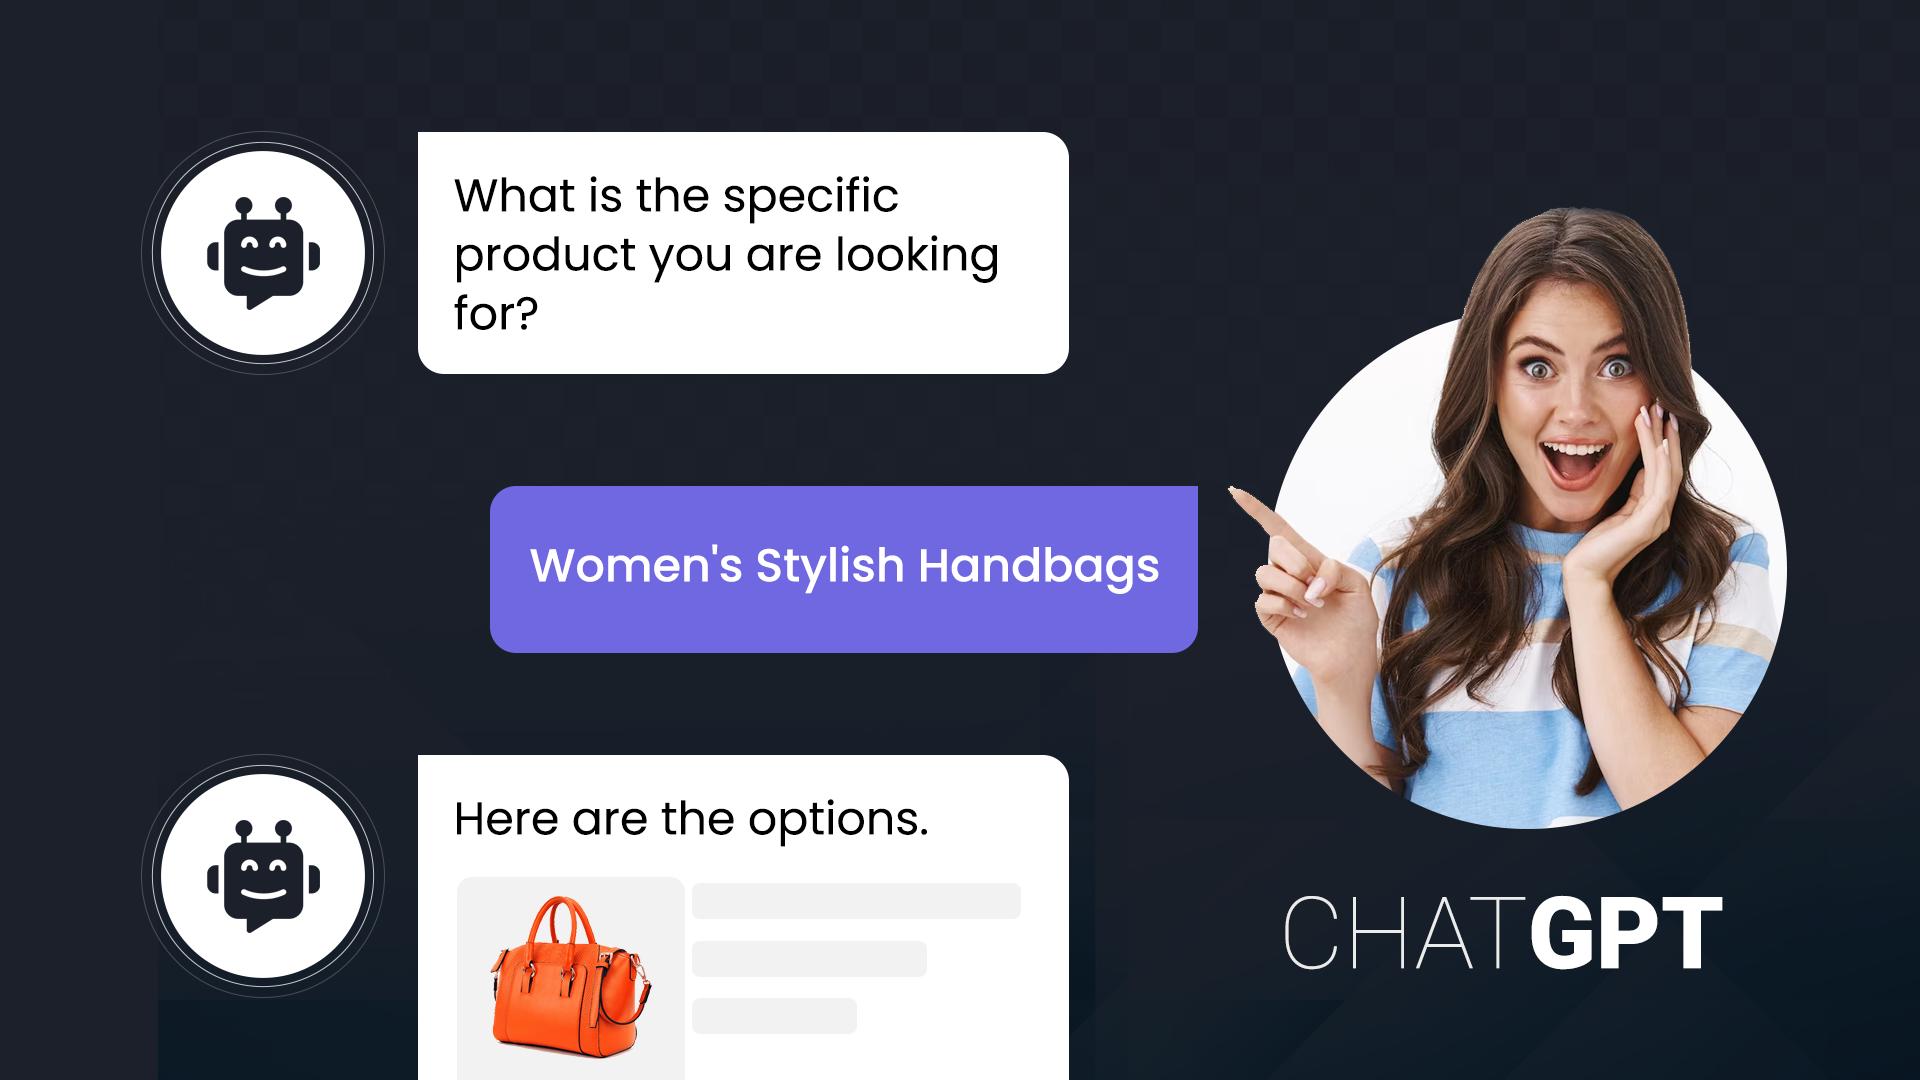 Spicychat chat. Чат ГБТ. Chat with ai. Skyeng на базе chatgpt.